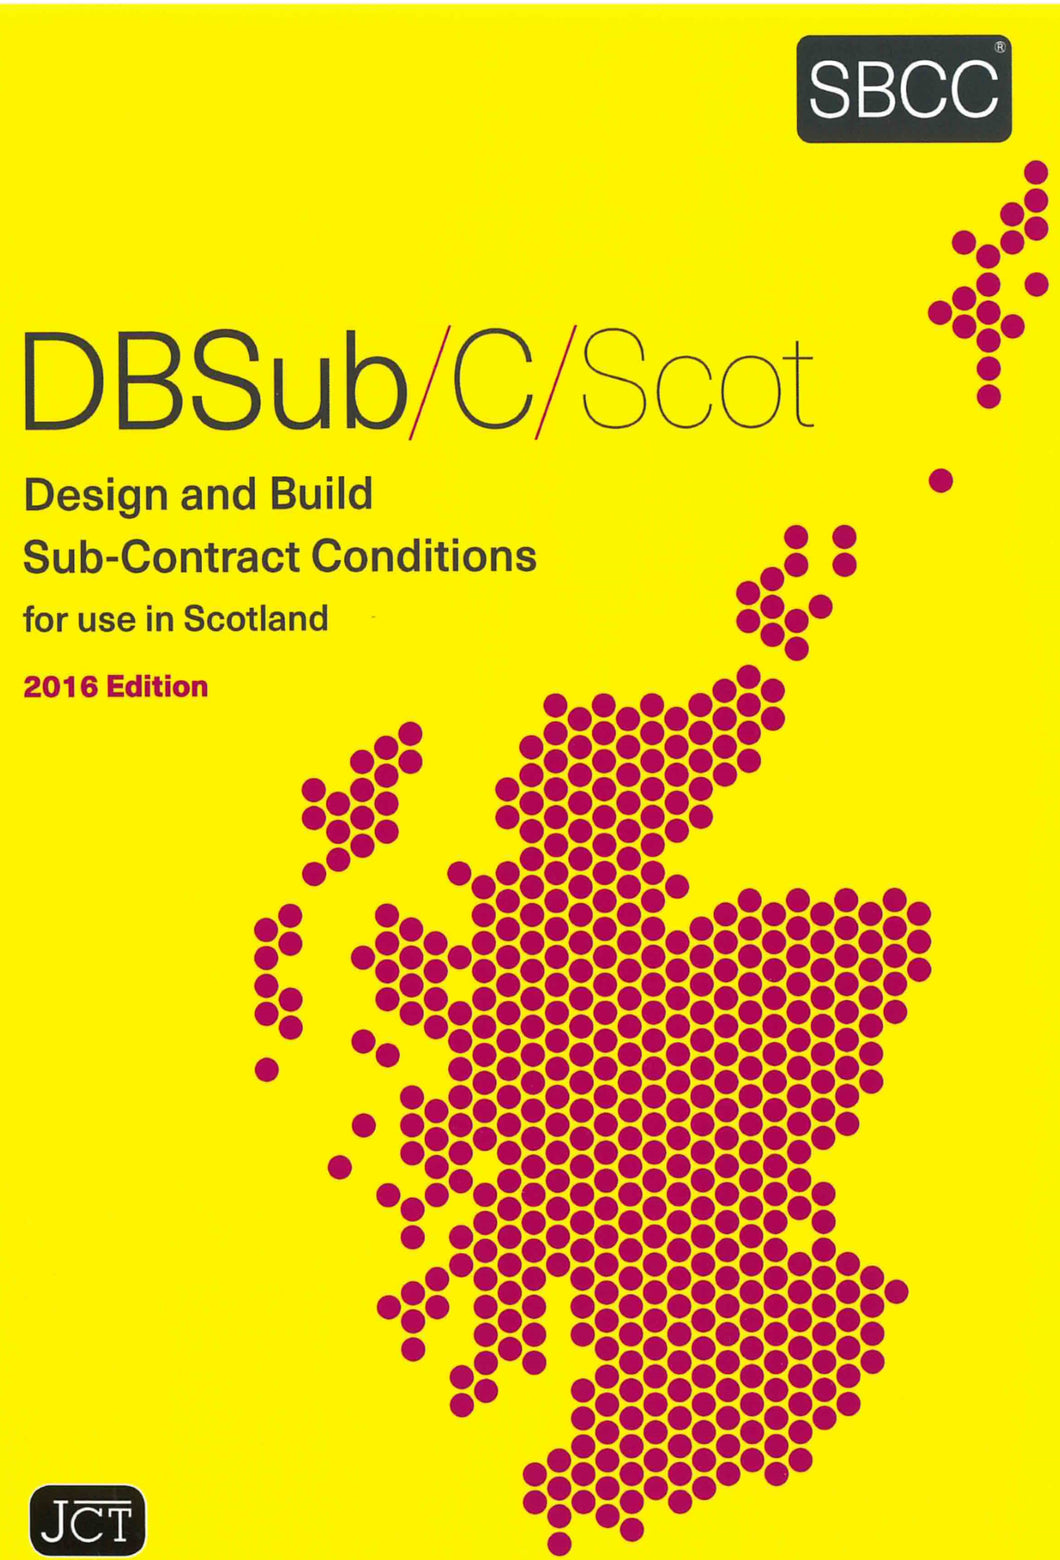 Design And Build Sub-Contract Conditions For Use In Scotland 2016